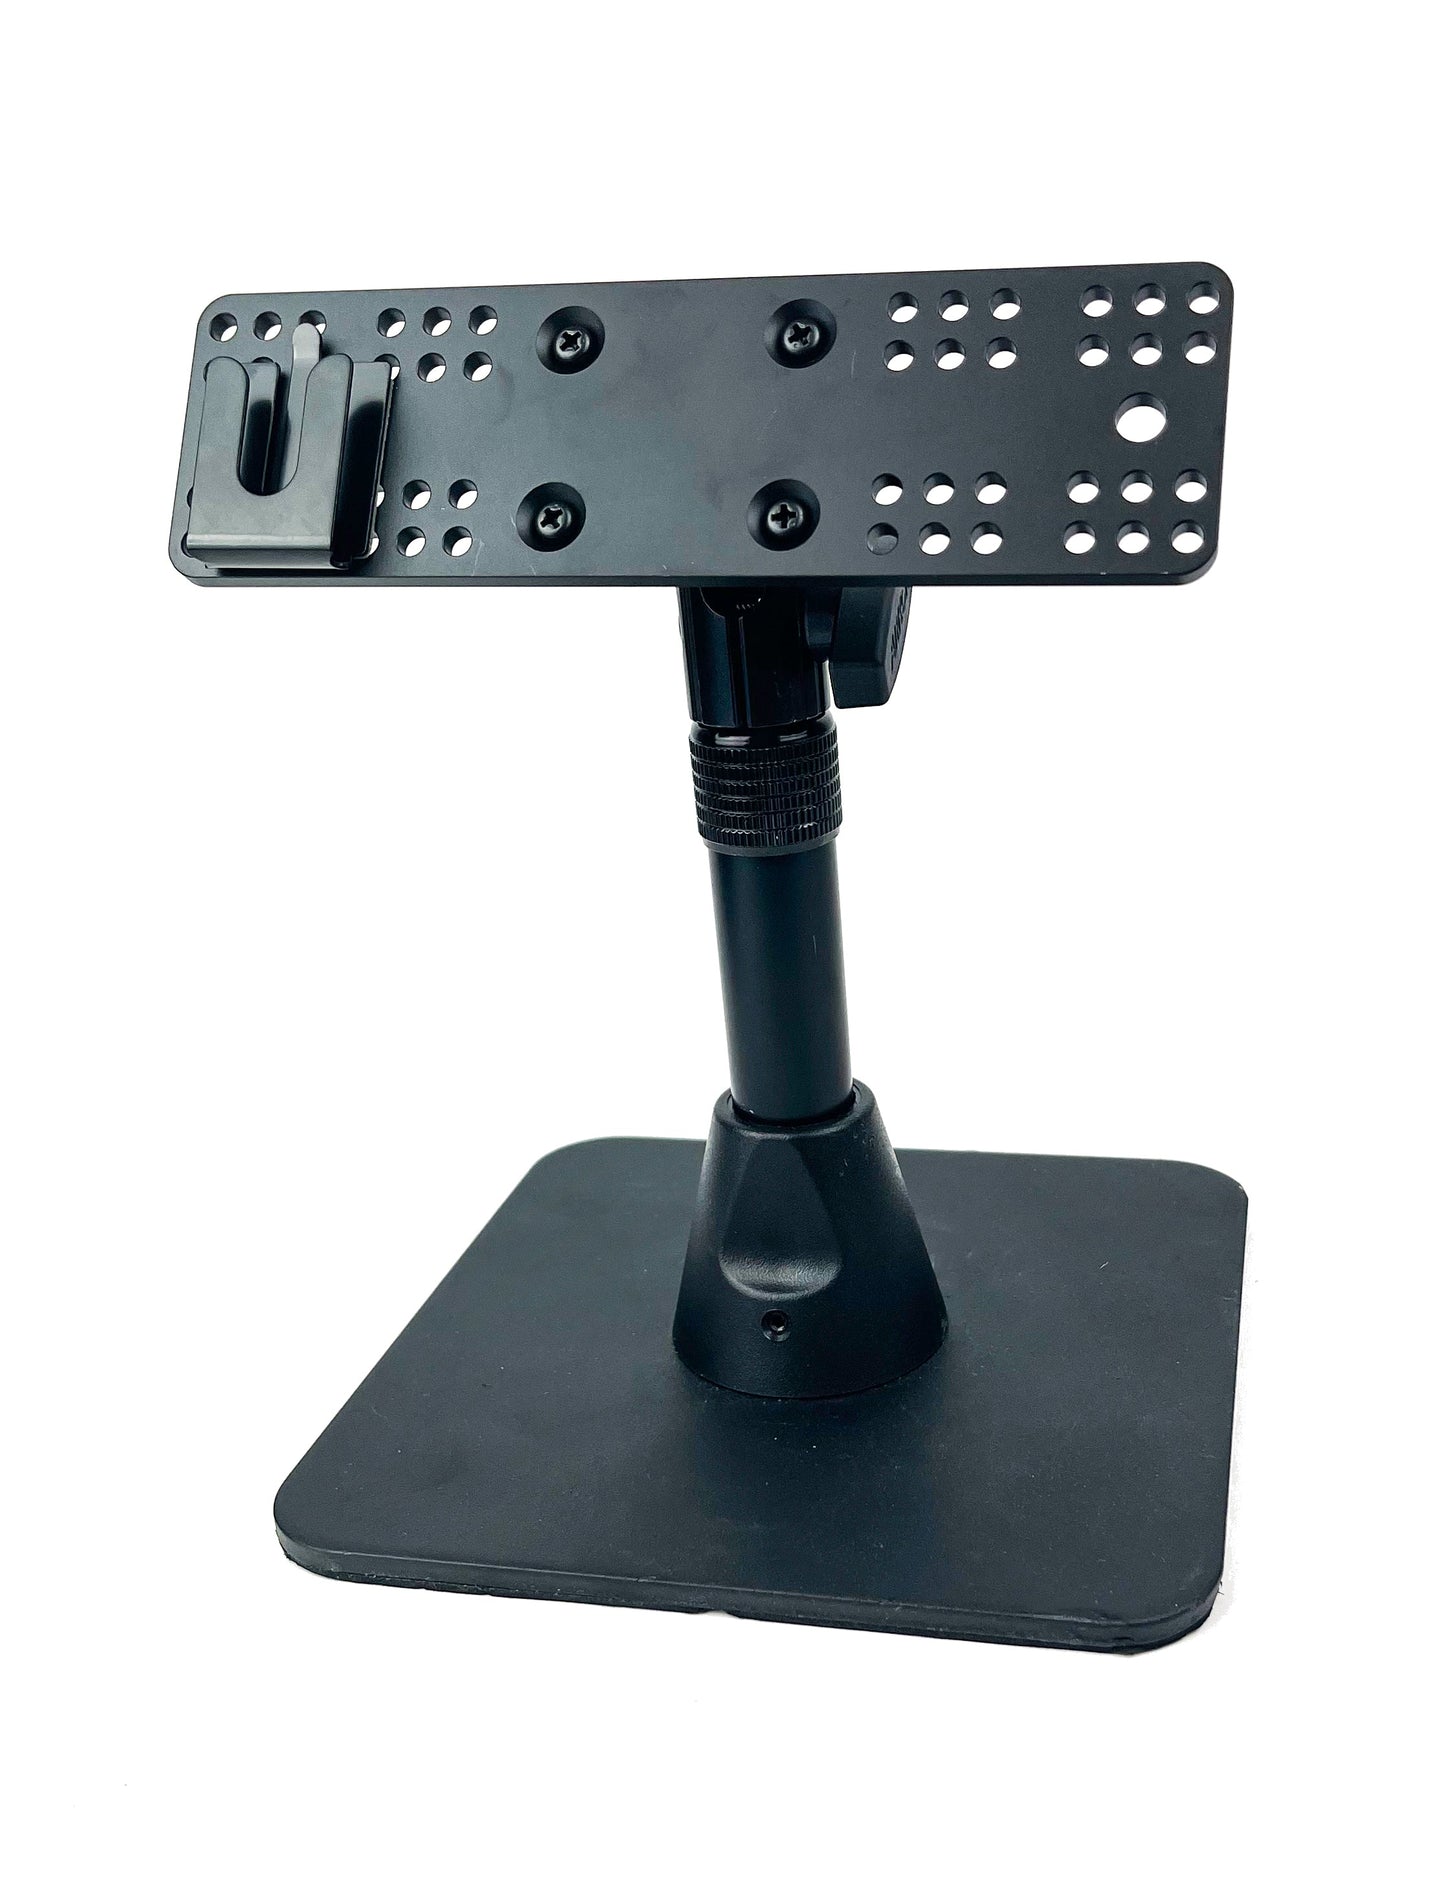 Base mount with mic hanger for the AT-588UV remote head